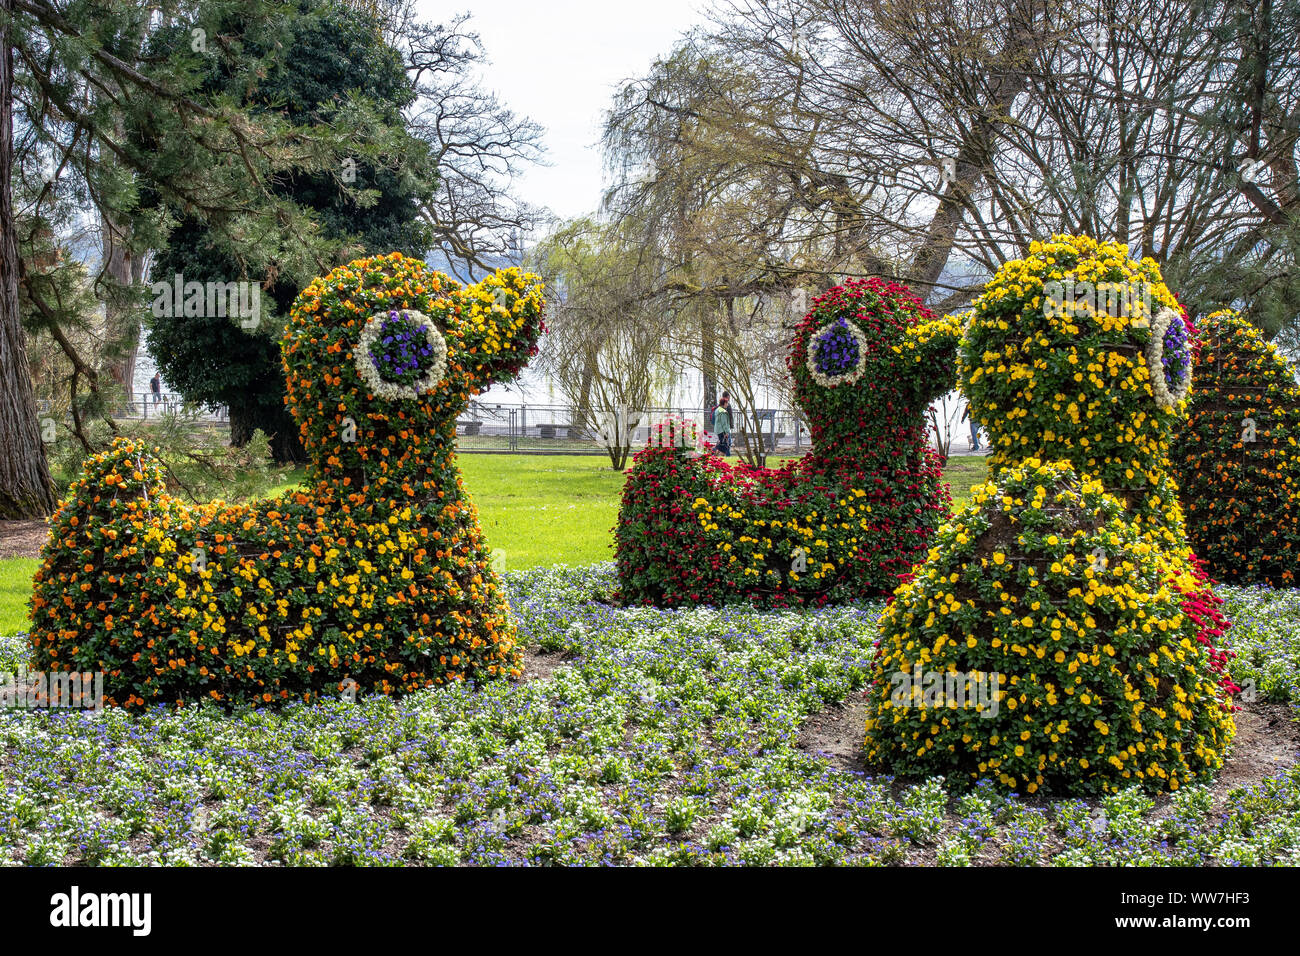 Germany, Baden-Wuerttemberg, Constance, Lake Constance, Mainau Island, Colorful flower art on the island of Mainau in Lake Constance Stock Photo